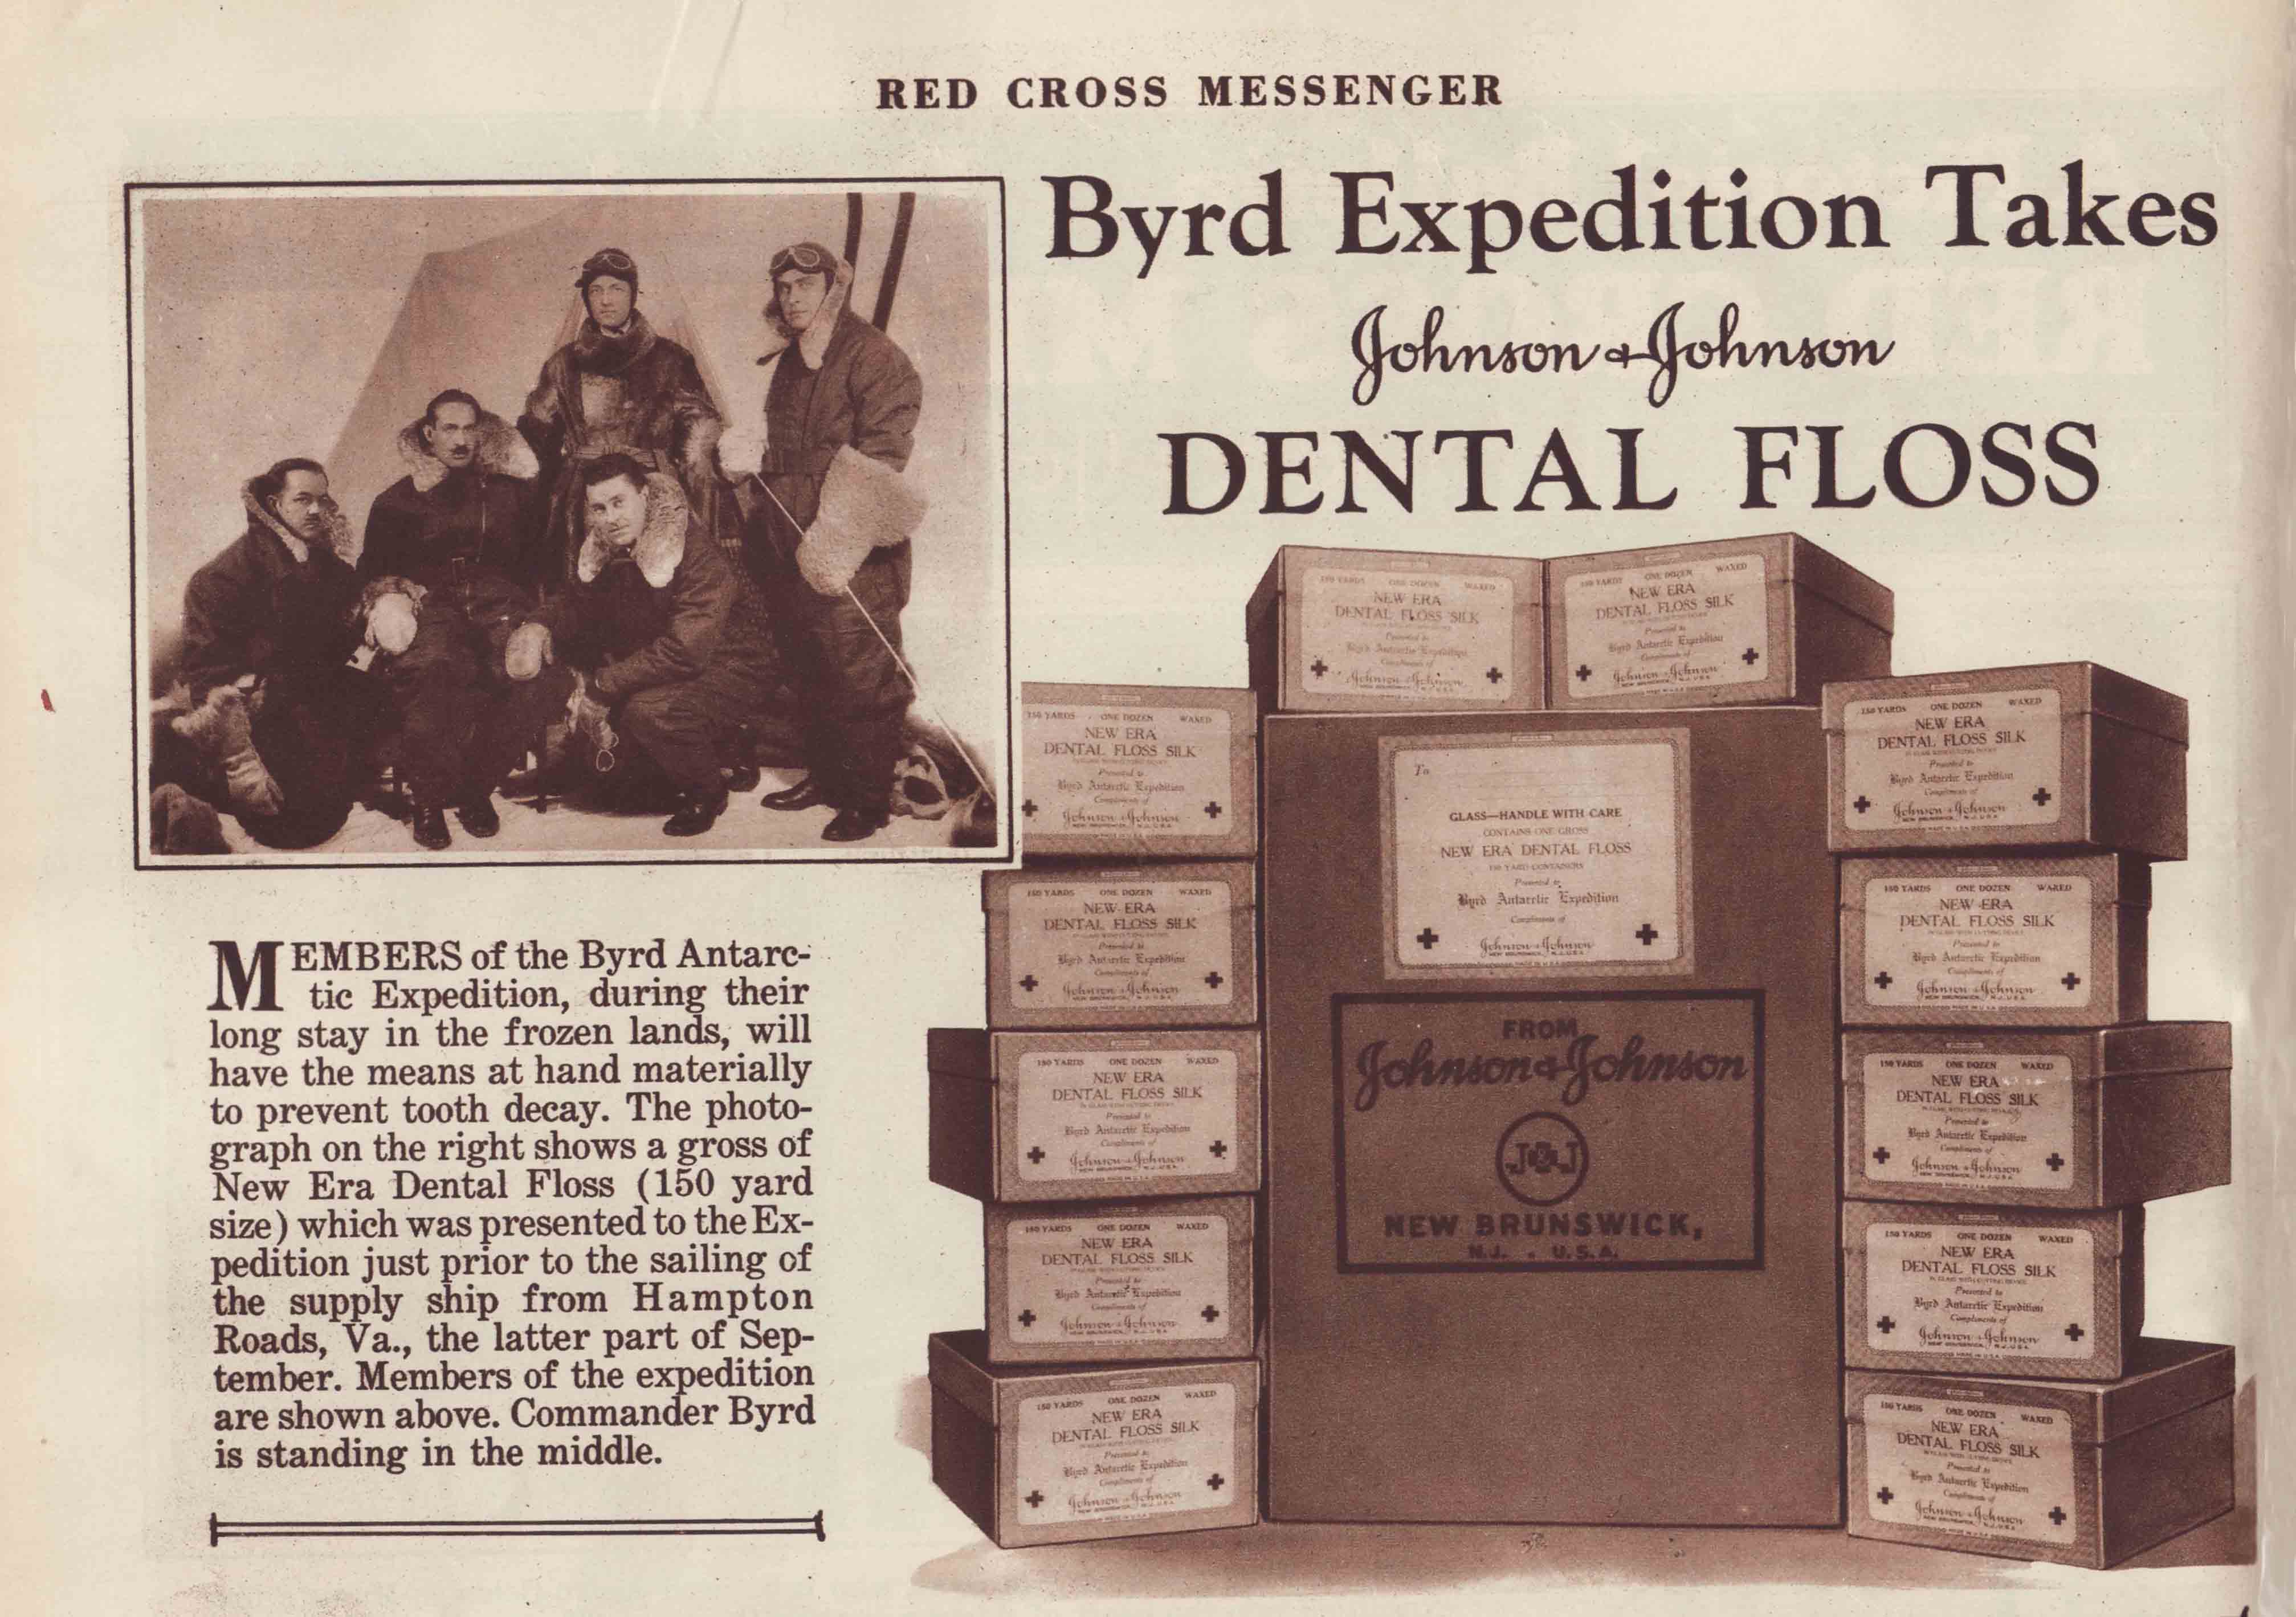 The Johnson & Johnson Dental Floss that went to the Antarctic in 1928 with Admiral Byrd. Image: Johnson & Johnson Archives.